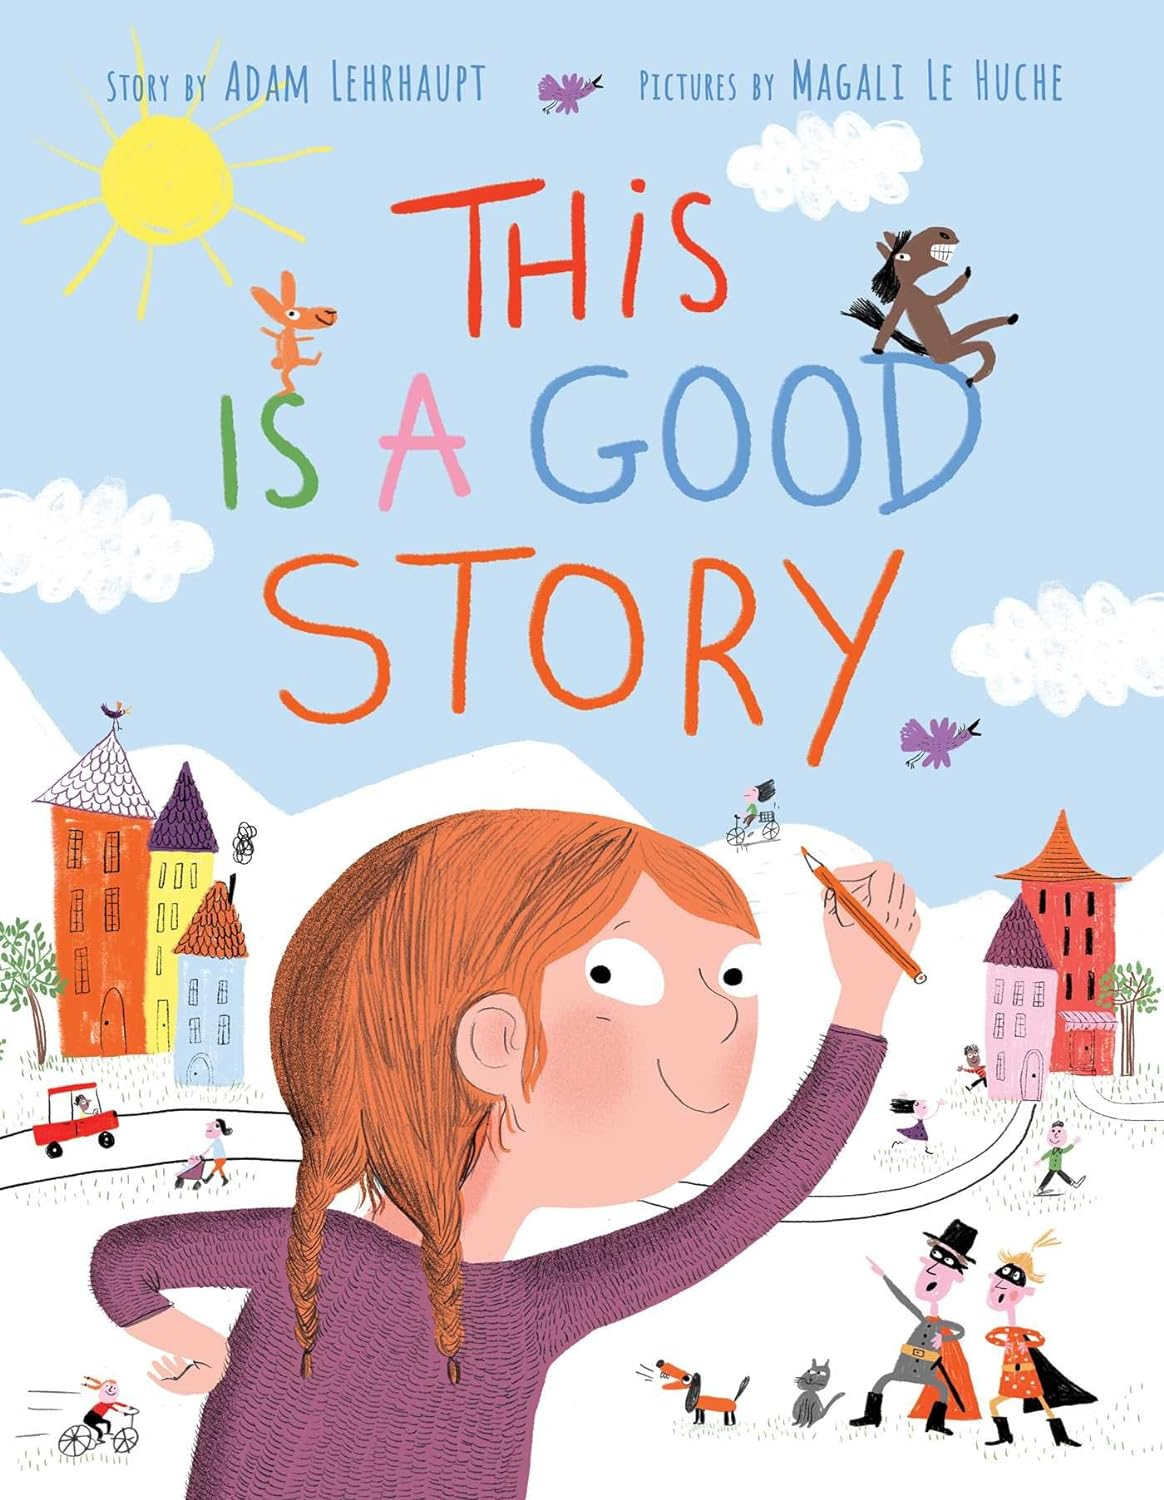 Book - this is a good story